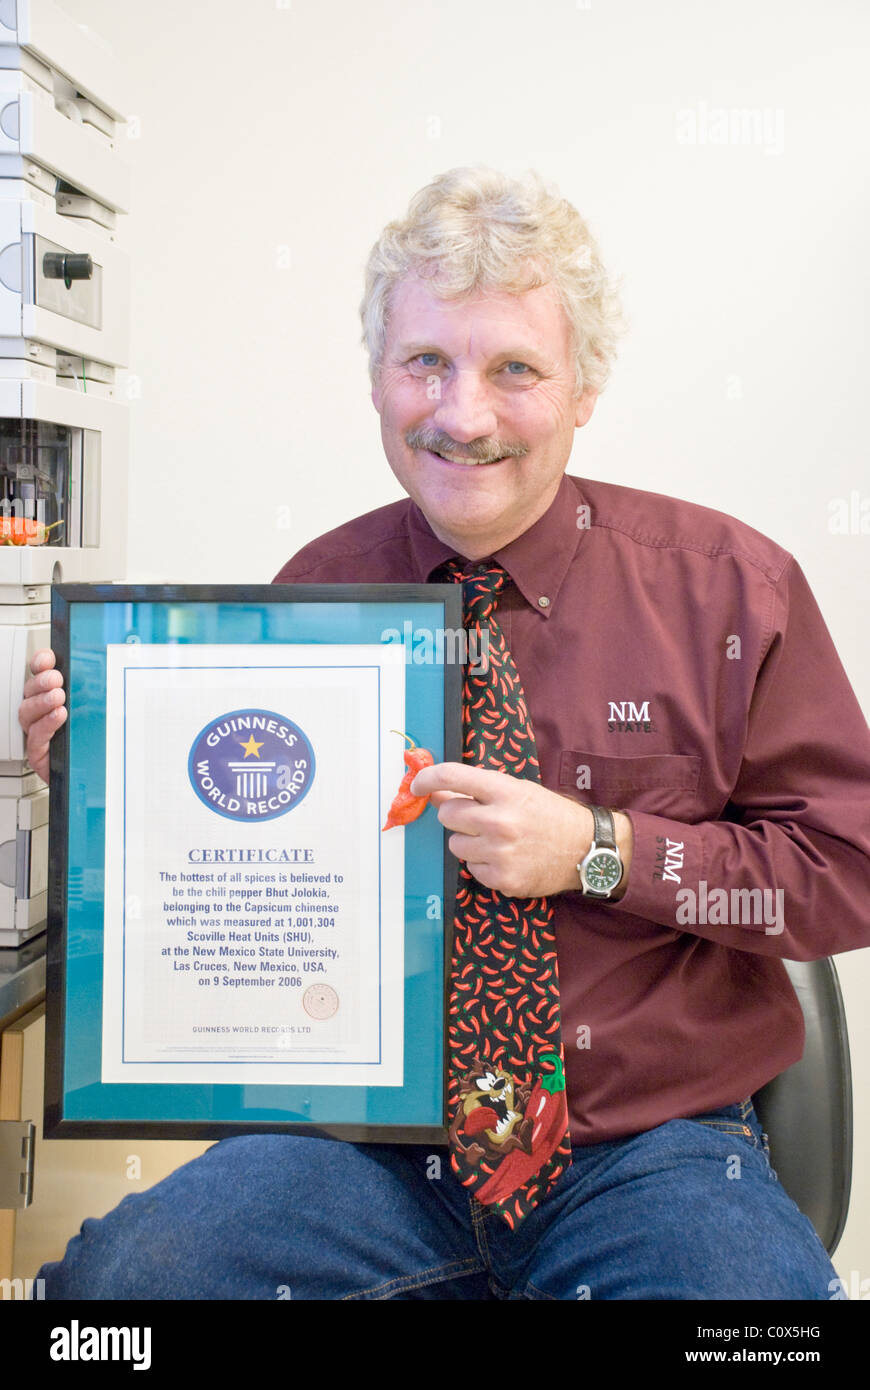 Certified by Guinness World Records, Professor Paul Bosland displays the Bhut Jolokia - once the world's hottest chili pepper. Stock Photo